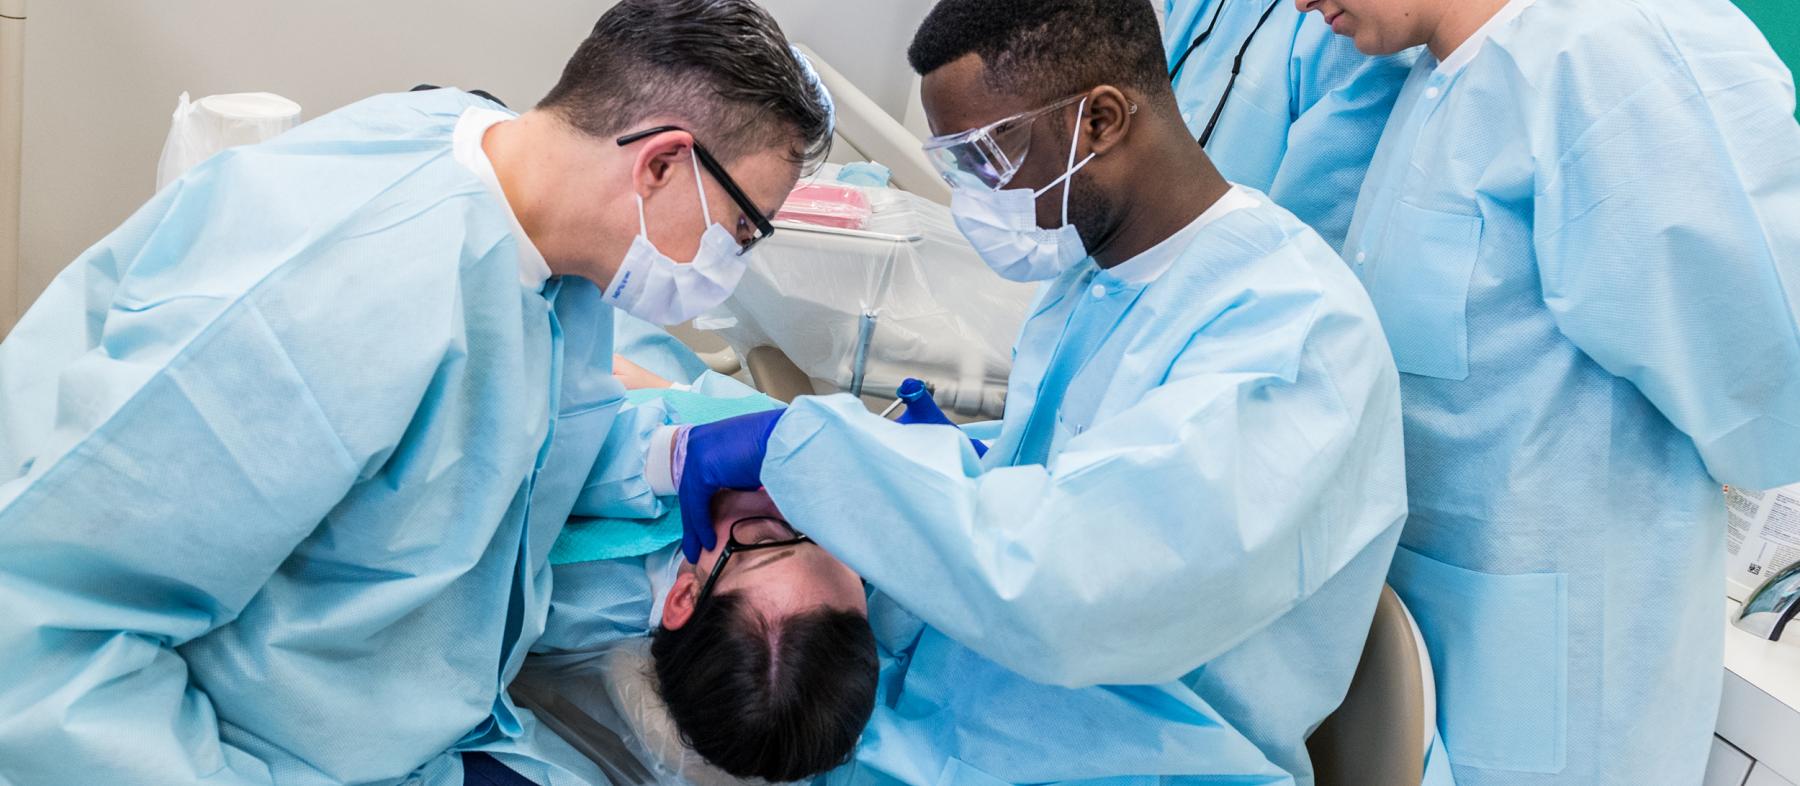 A student and professor work on a patient in a dental clinic